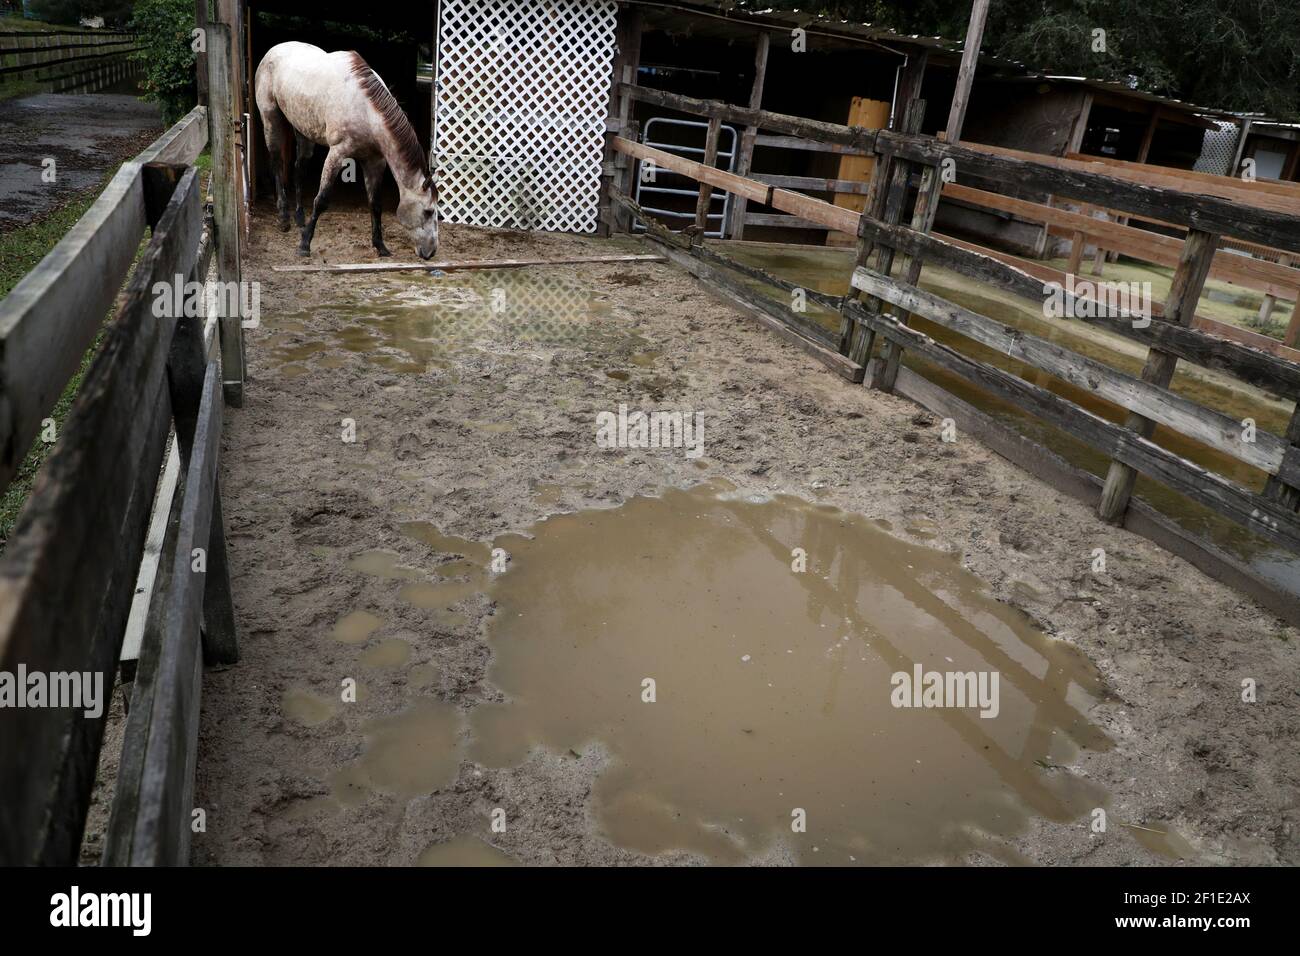 A horse at the Rancho Gonzalez stable in Davie, avoids a large puddle water days after Tropical Storm Eta flooded parts of South Florida. (Photo by Carline Jean/South Florida Sun Sentinel/TNS/Sipa USA) Stock Photo